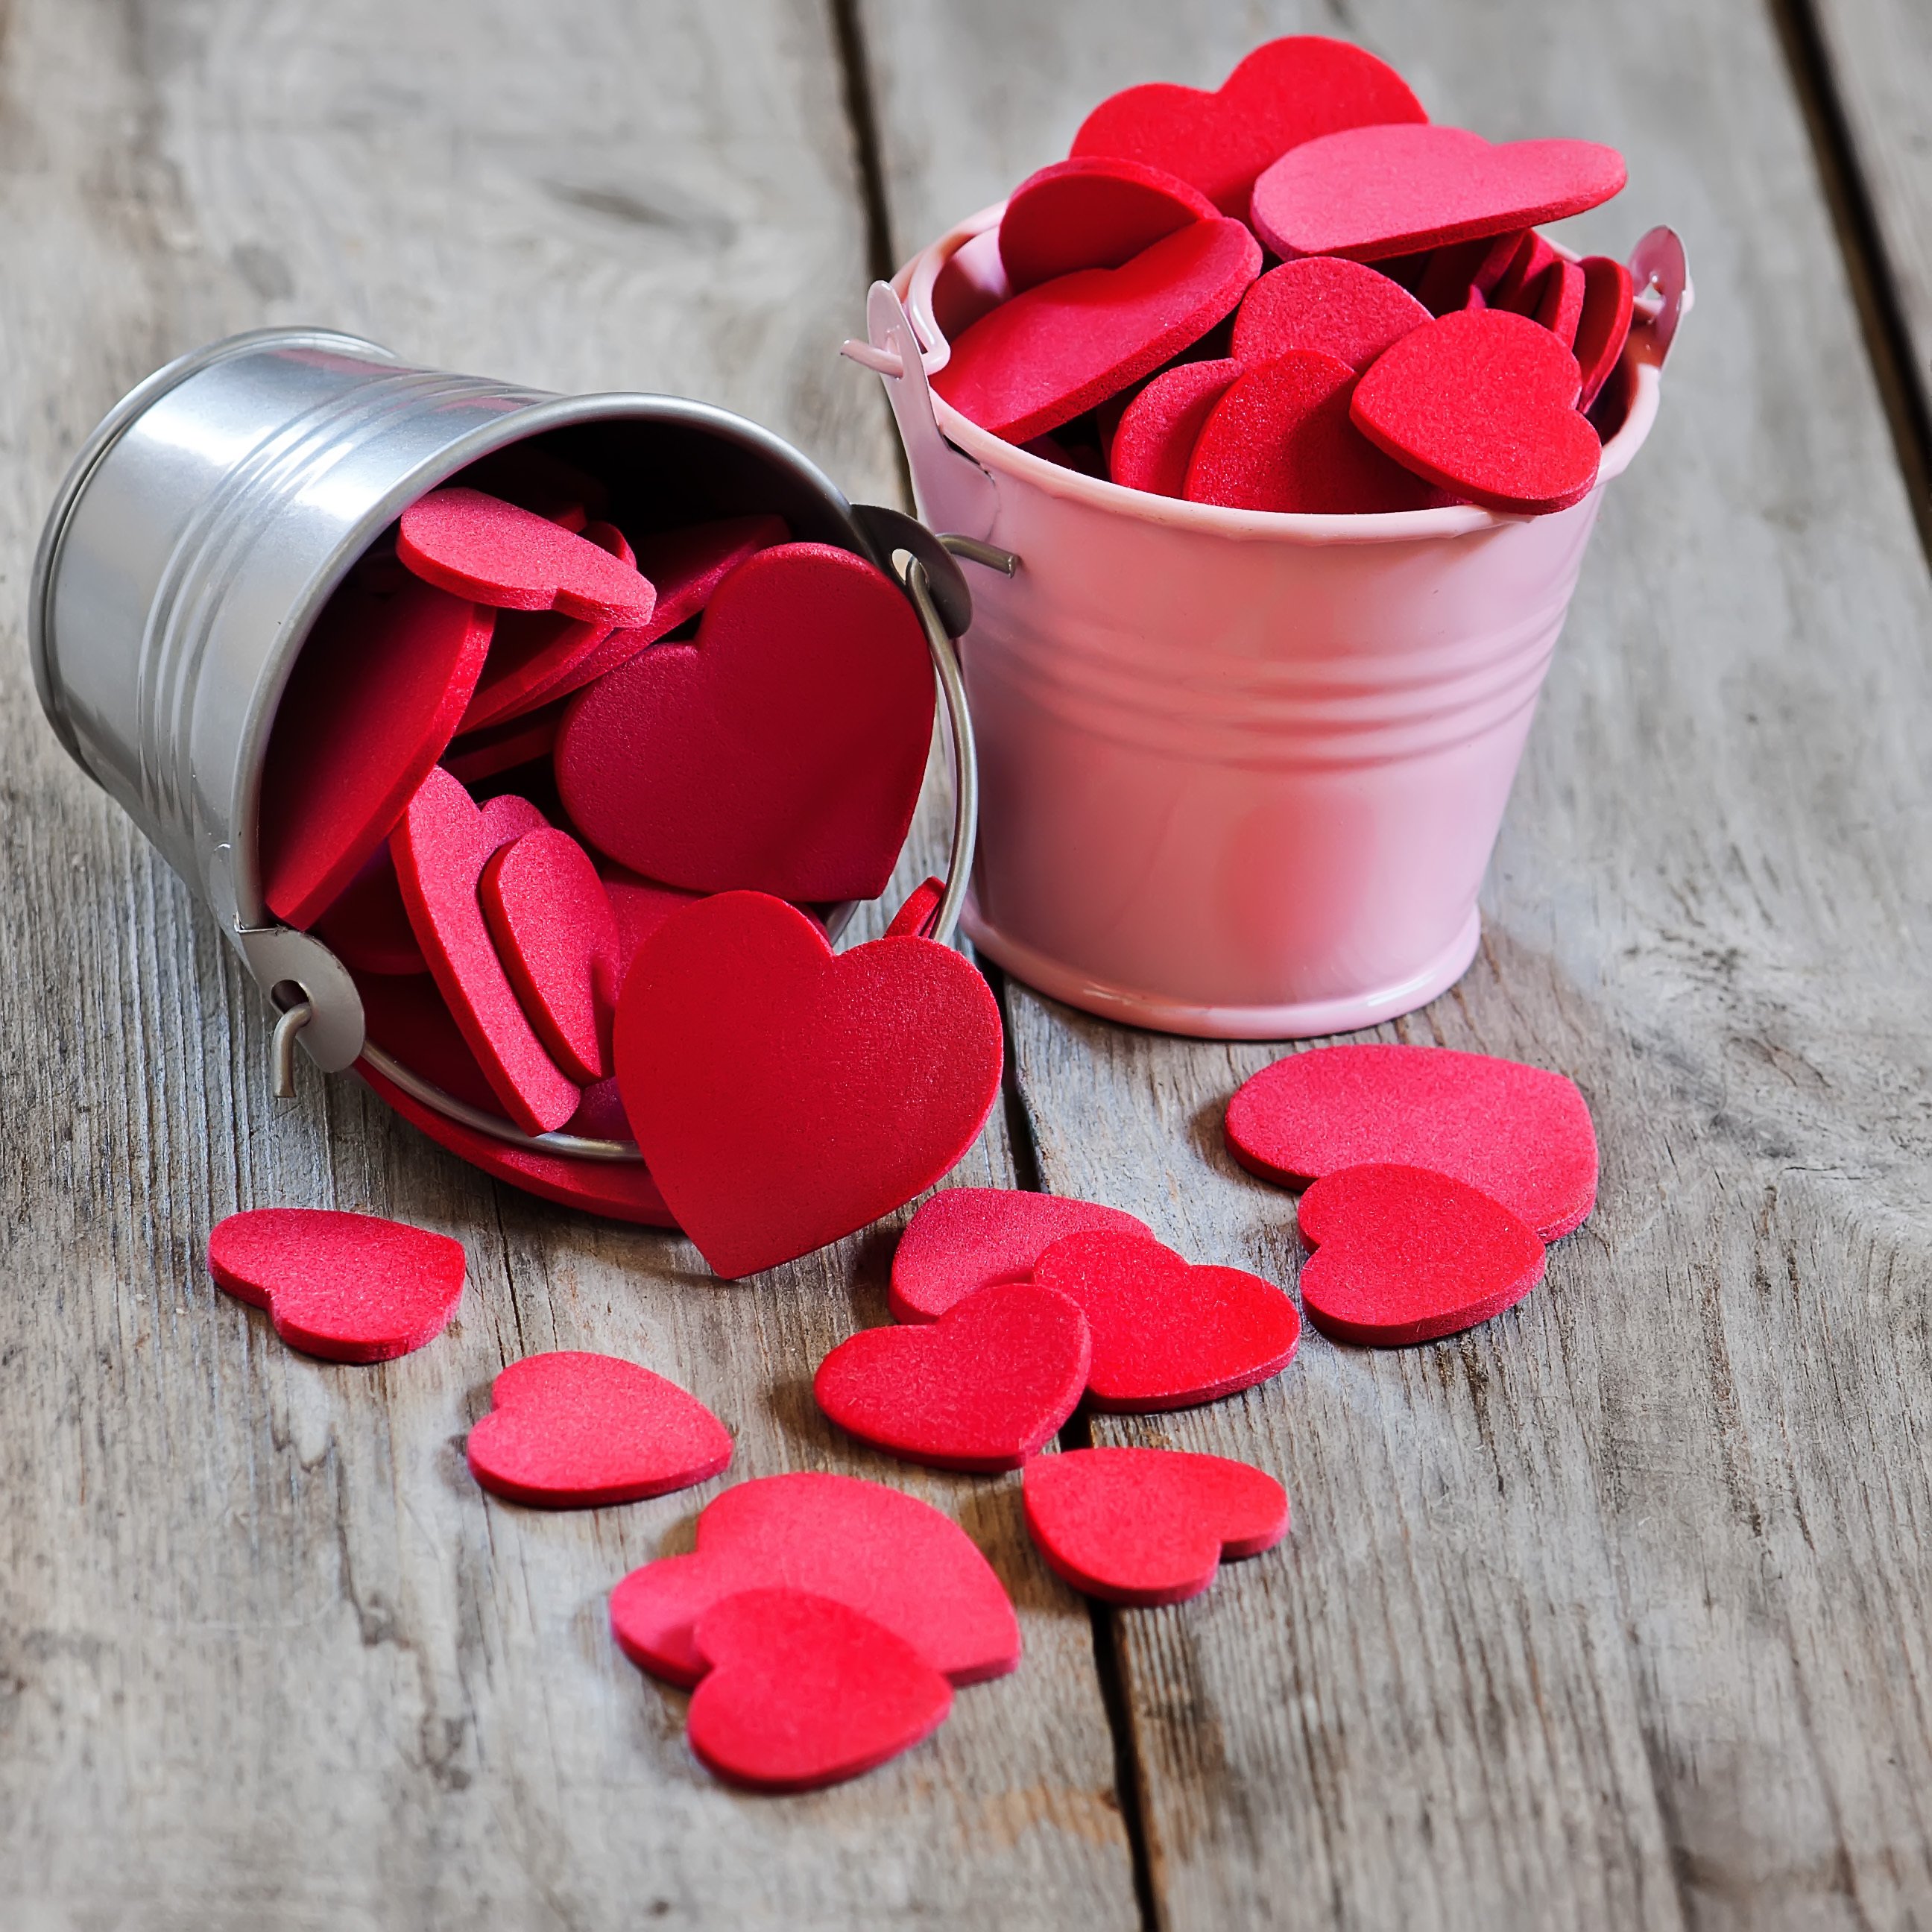 buckets, Couples, Decorations, Floor, Holidays, Love, Pink, Pink, Buckets, Red, Hearts, Red, Sponge, Heart, Romantic, Special, Sponge, Hearts, Valentineand039s, Day, Wood, Wooden, Floor Wallpaper